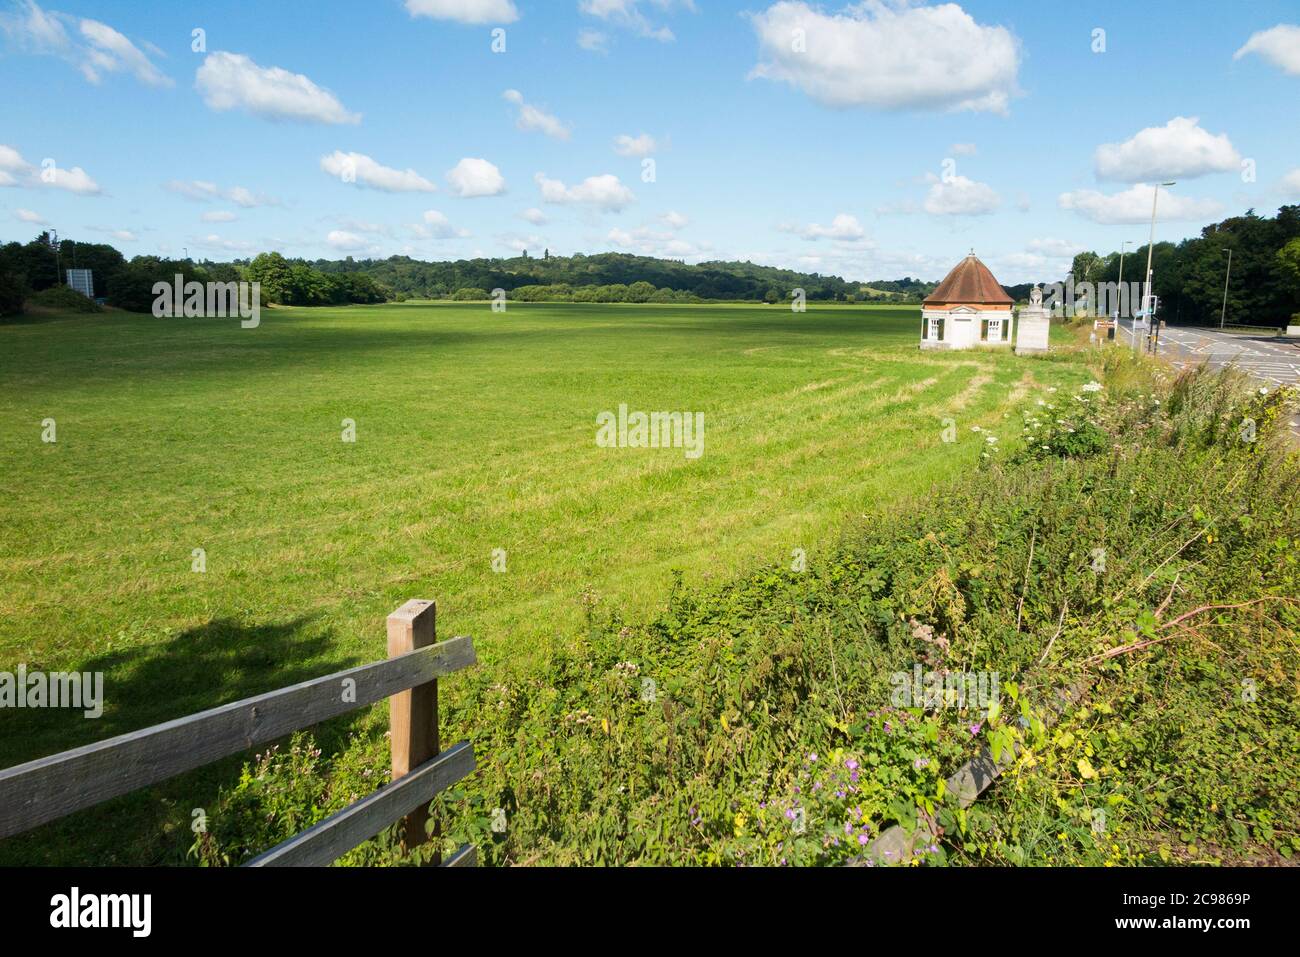 Runnymede meadows & flood plain, site of the signing of Magna Carta in year 1215 by King John & the English Barons. Bright and sunny summer day. Surrey UK (119) Stock Photo